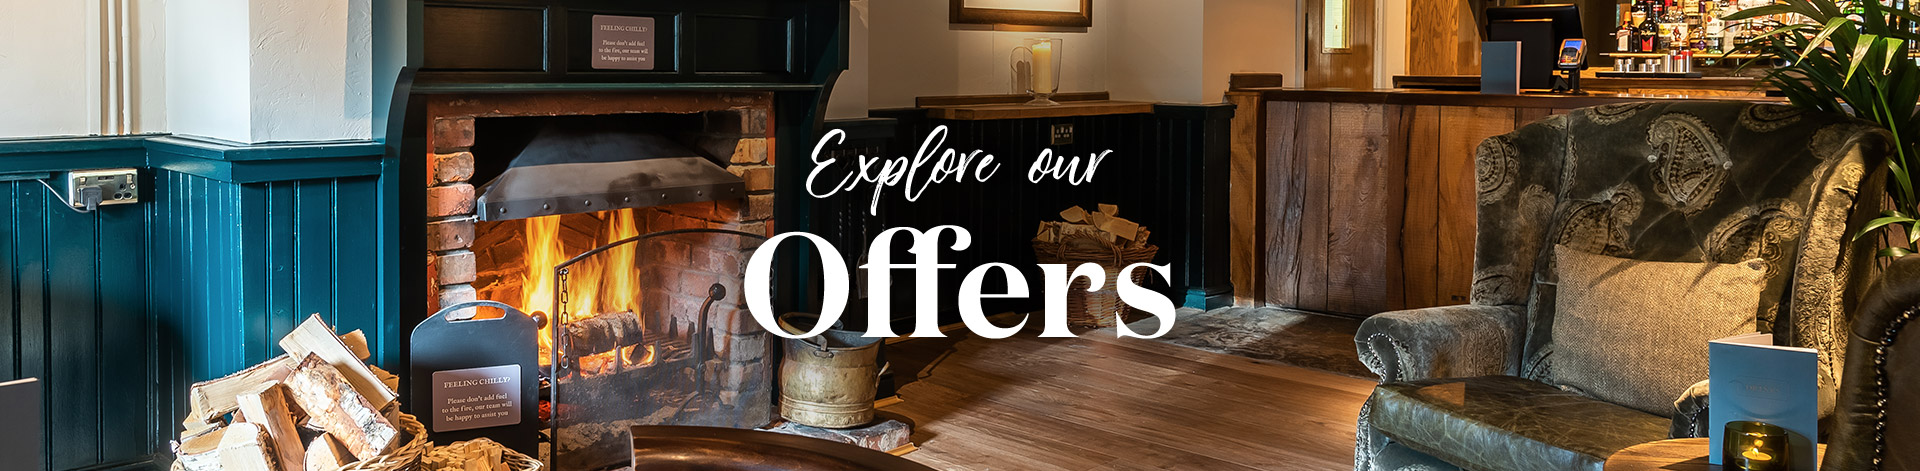 Our latest offers at The Swallow's Return